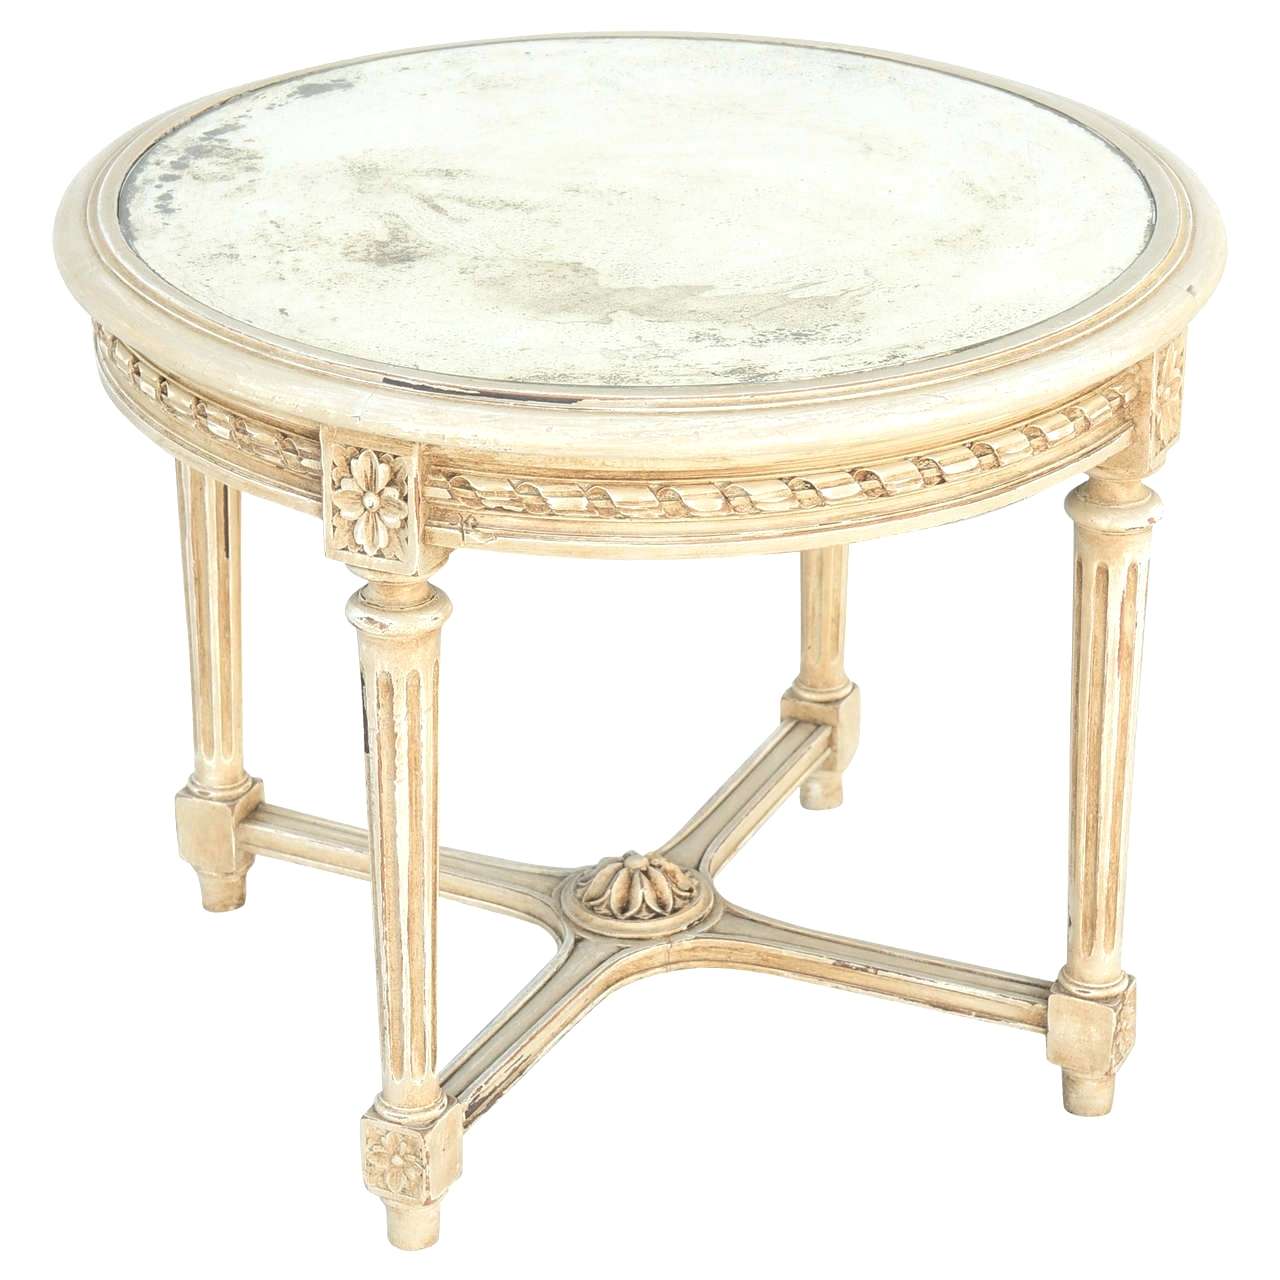 distressed accent table black round white tables biophilessurf info magnison wood metal drum shape shaped grey quatrefoil end with mirror garden furniture cabinet door knobs